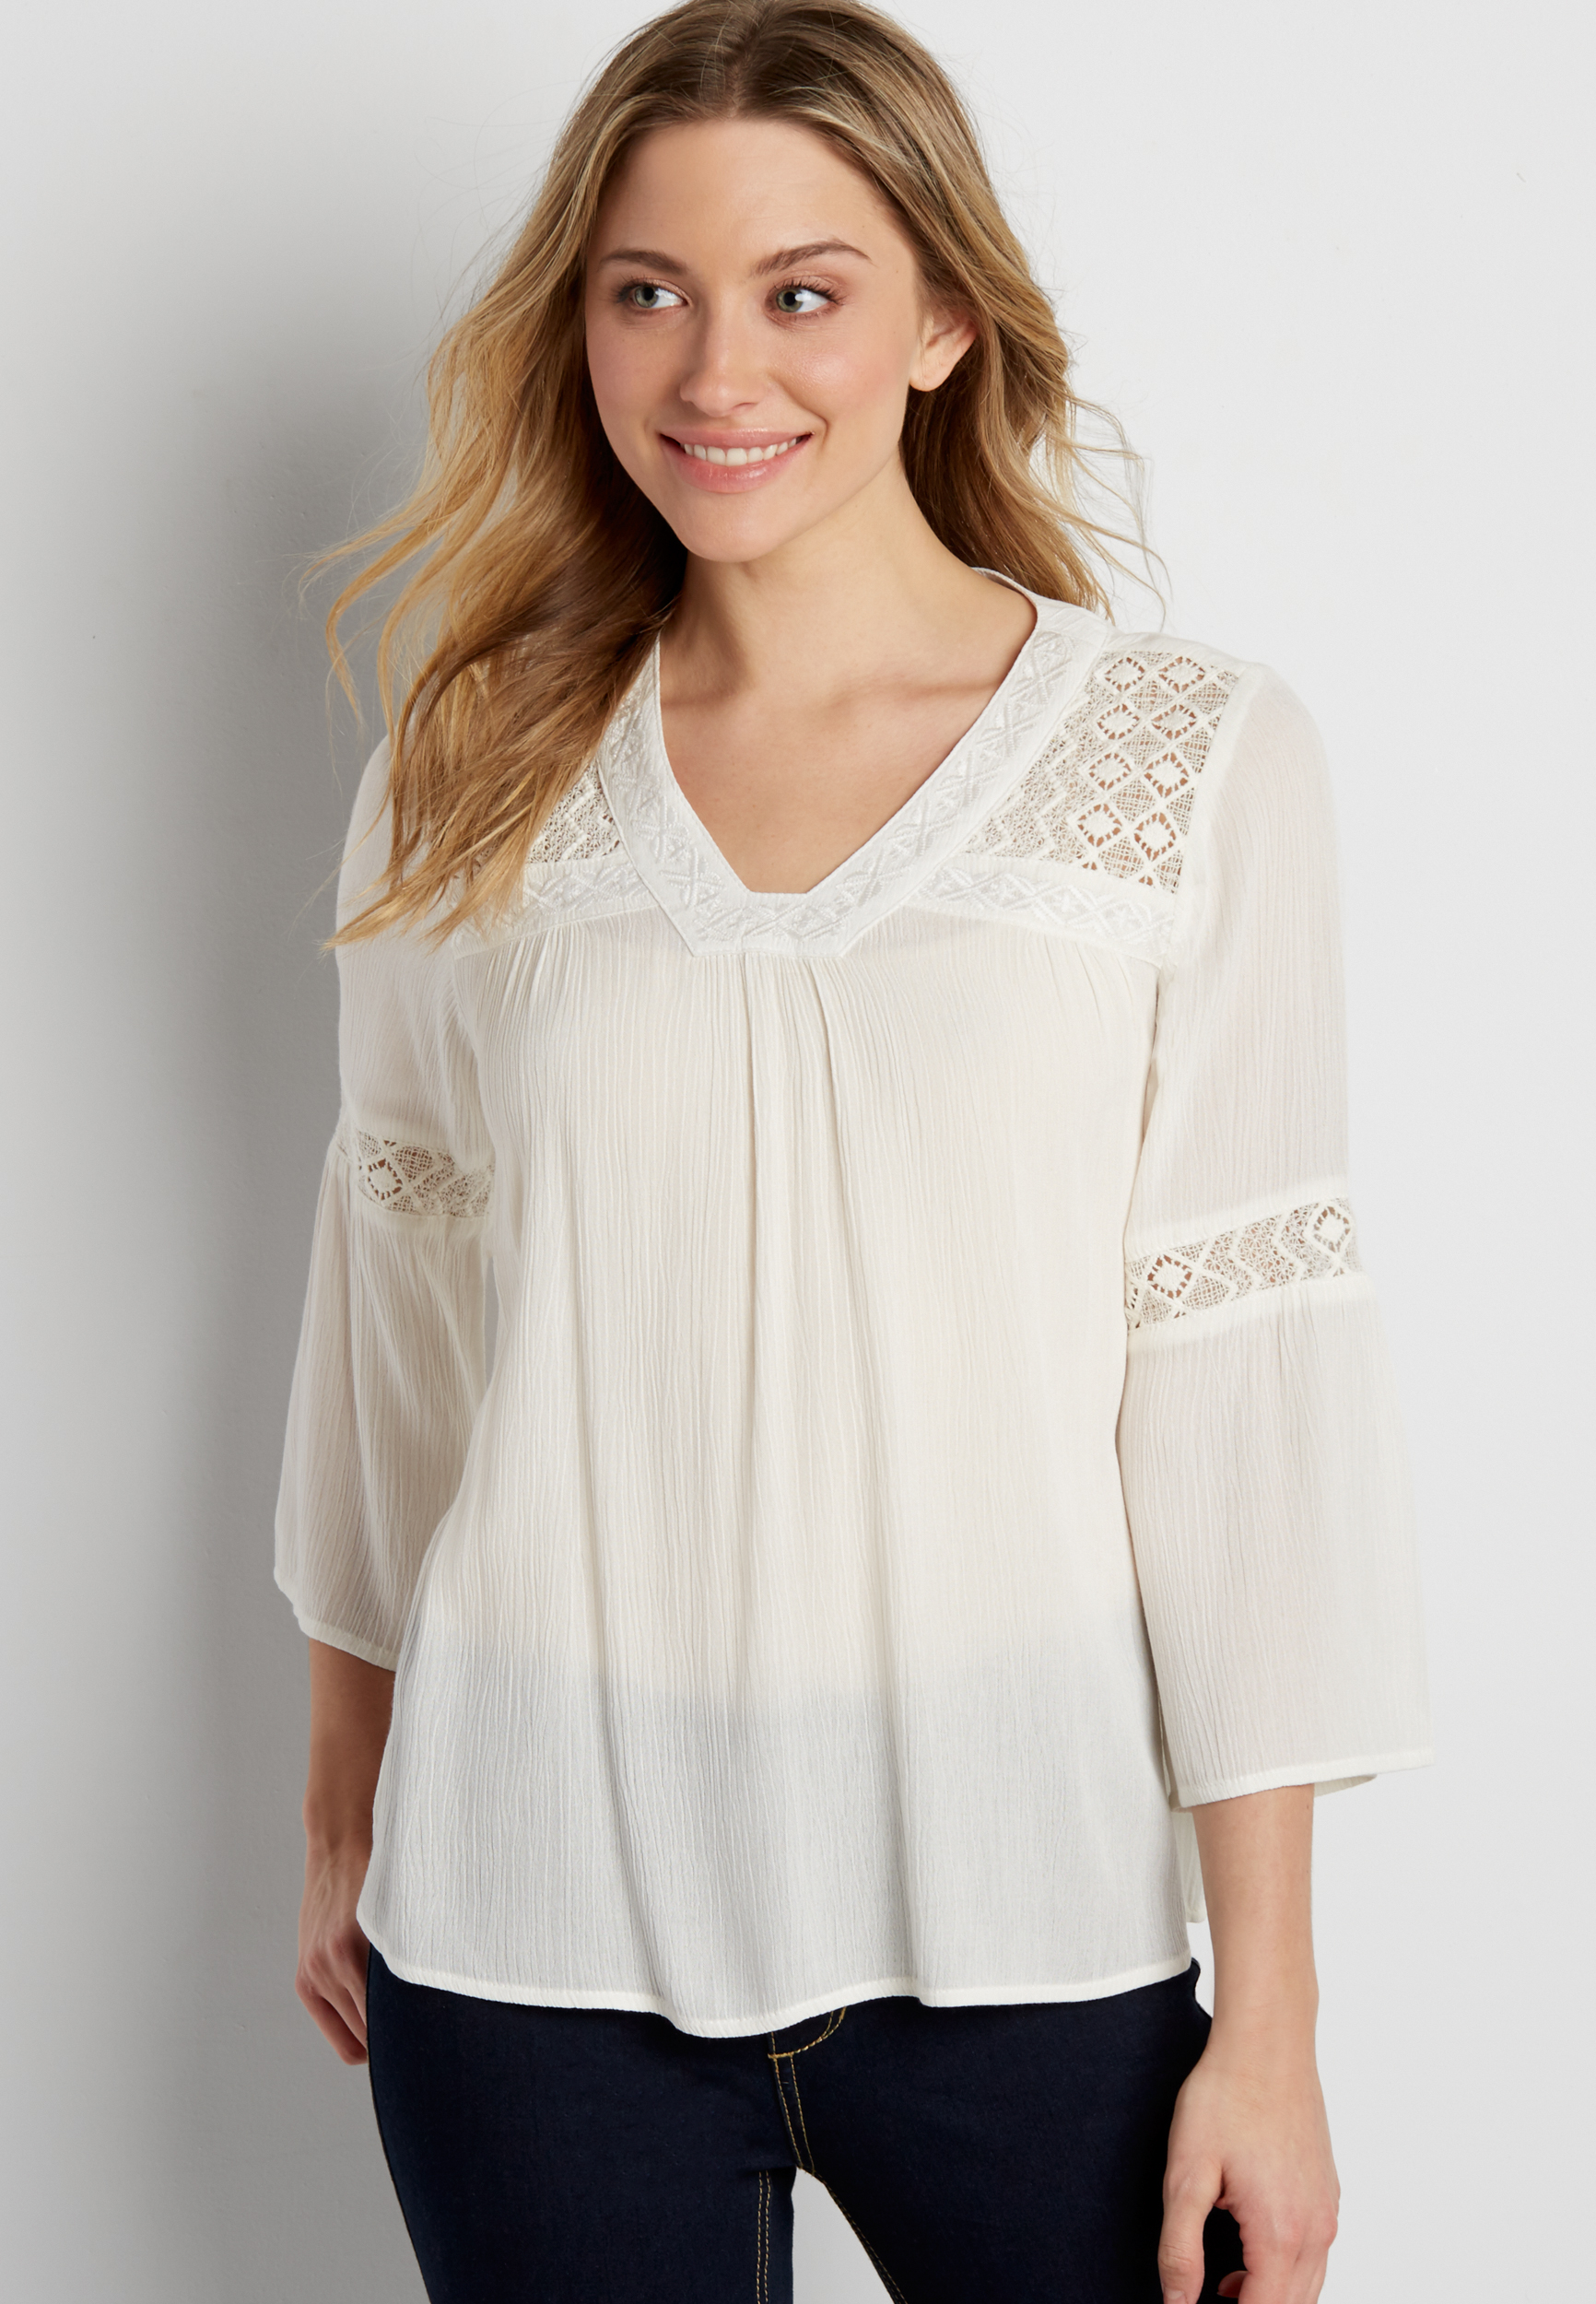 lightweight top with lace inlay and embroidery | maurices